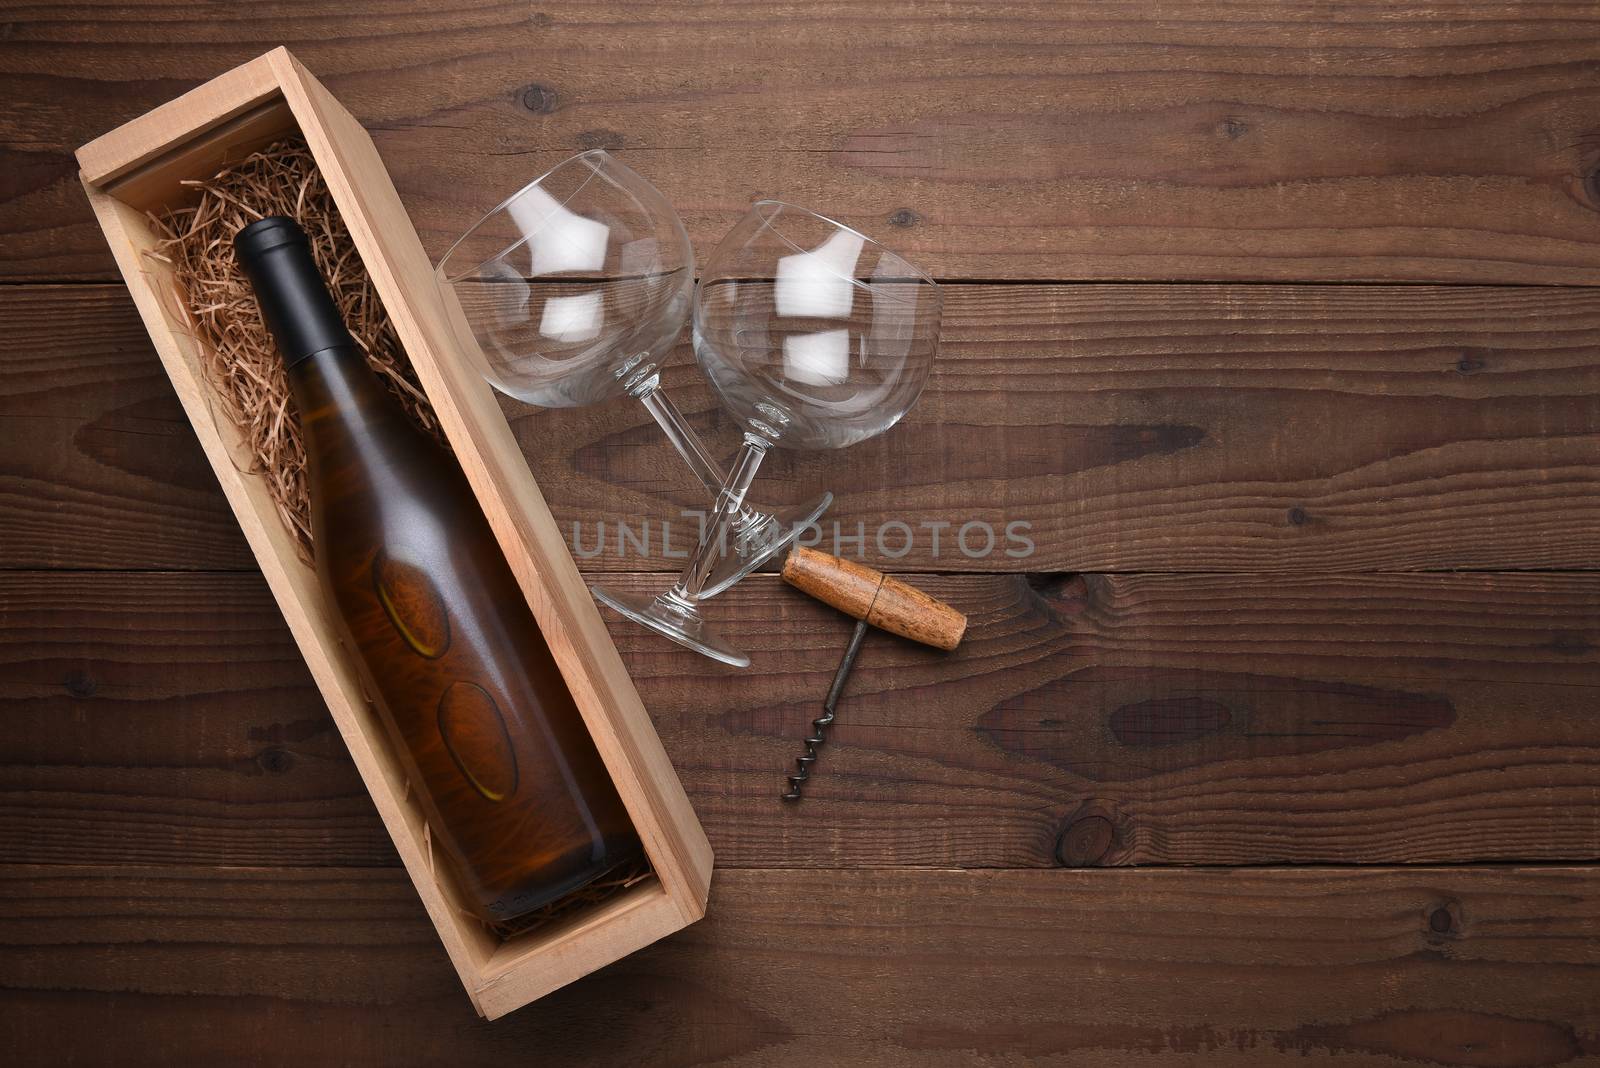 Chardonnay Wine Bottle in Wood Box with Copy Space by sCukrov